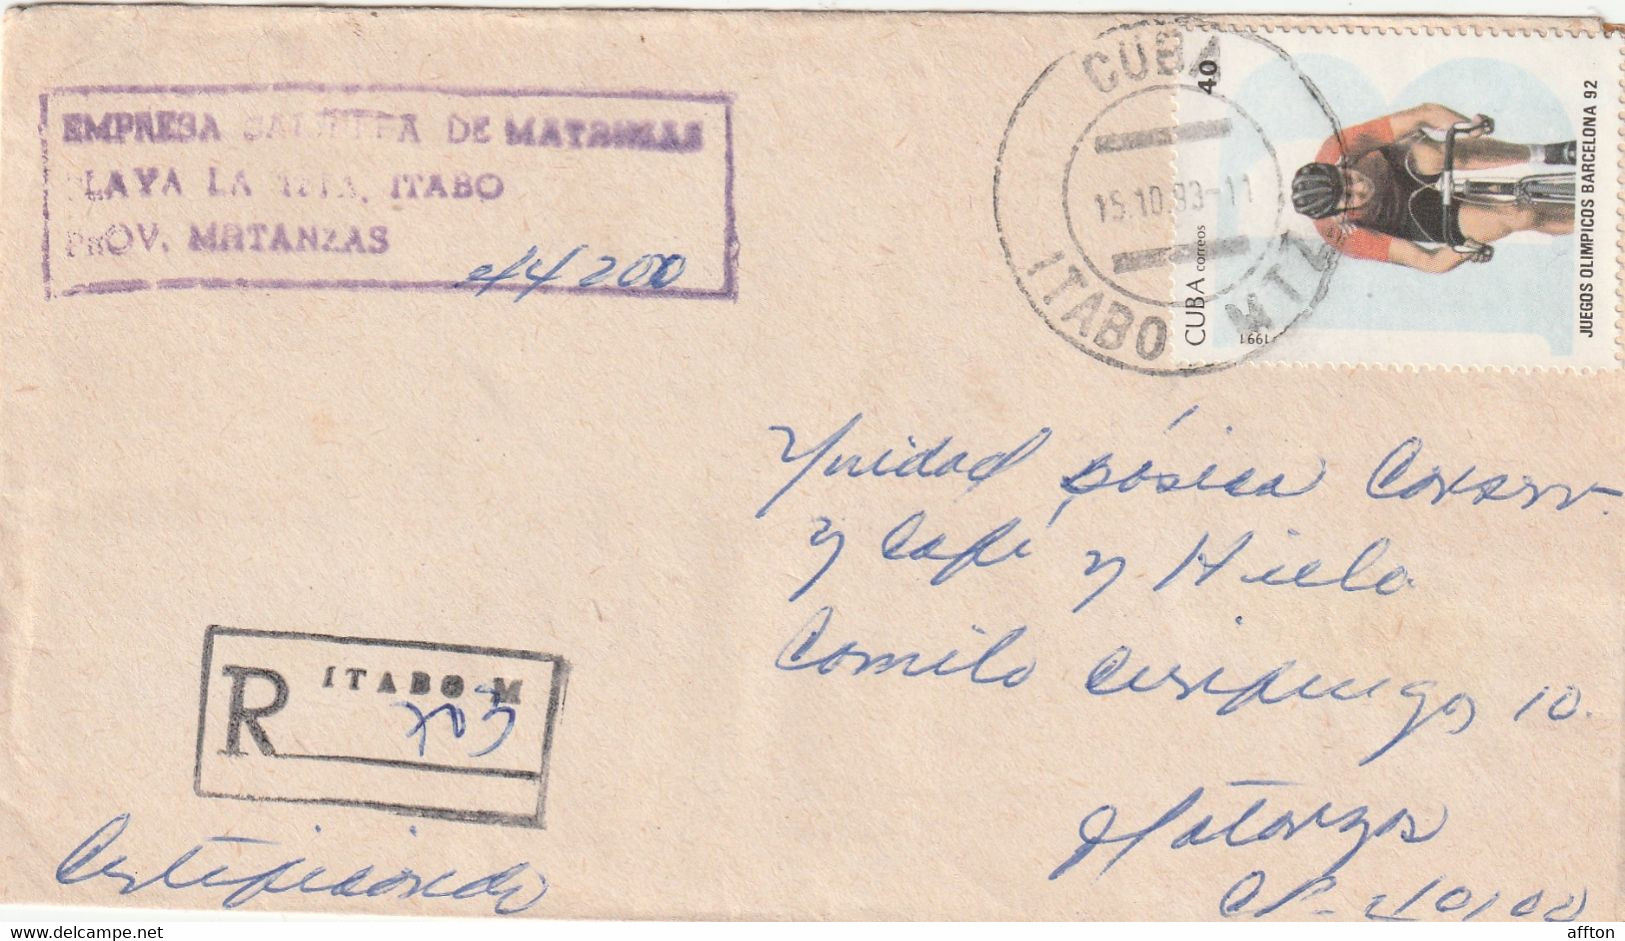 Itabo Cuba 1993 Registered Cover Mailed - Covers & Documents